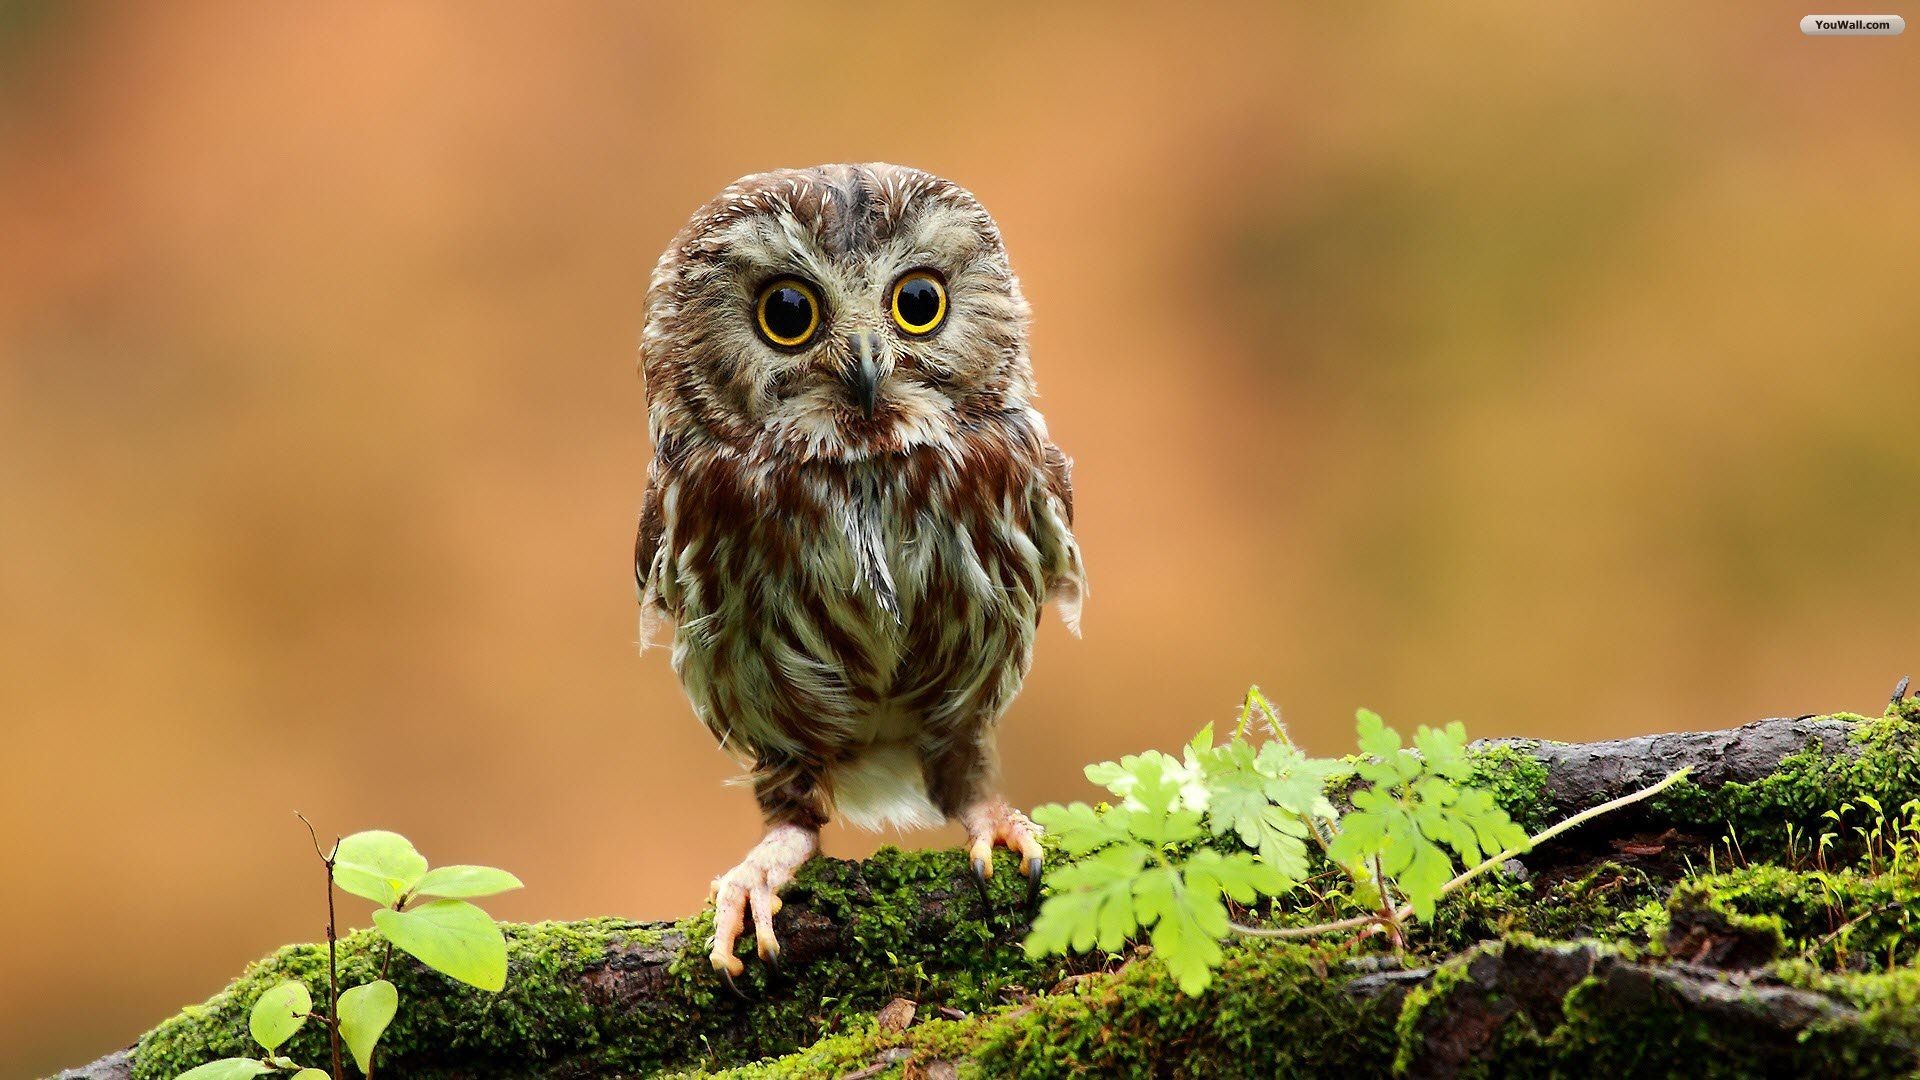 1920x1080 A selection of 10 Images of Owl in HD quality - HD Wallpapers